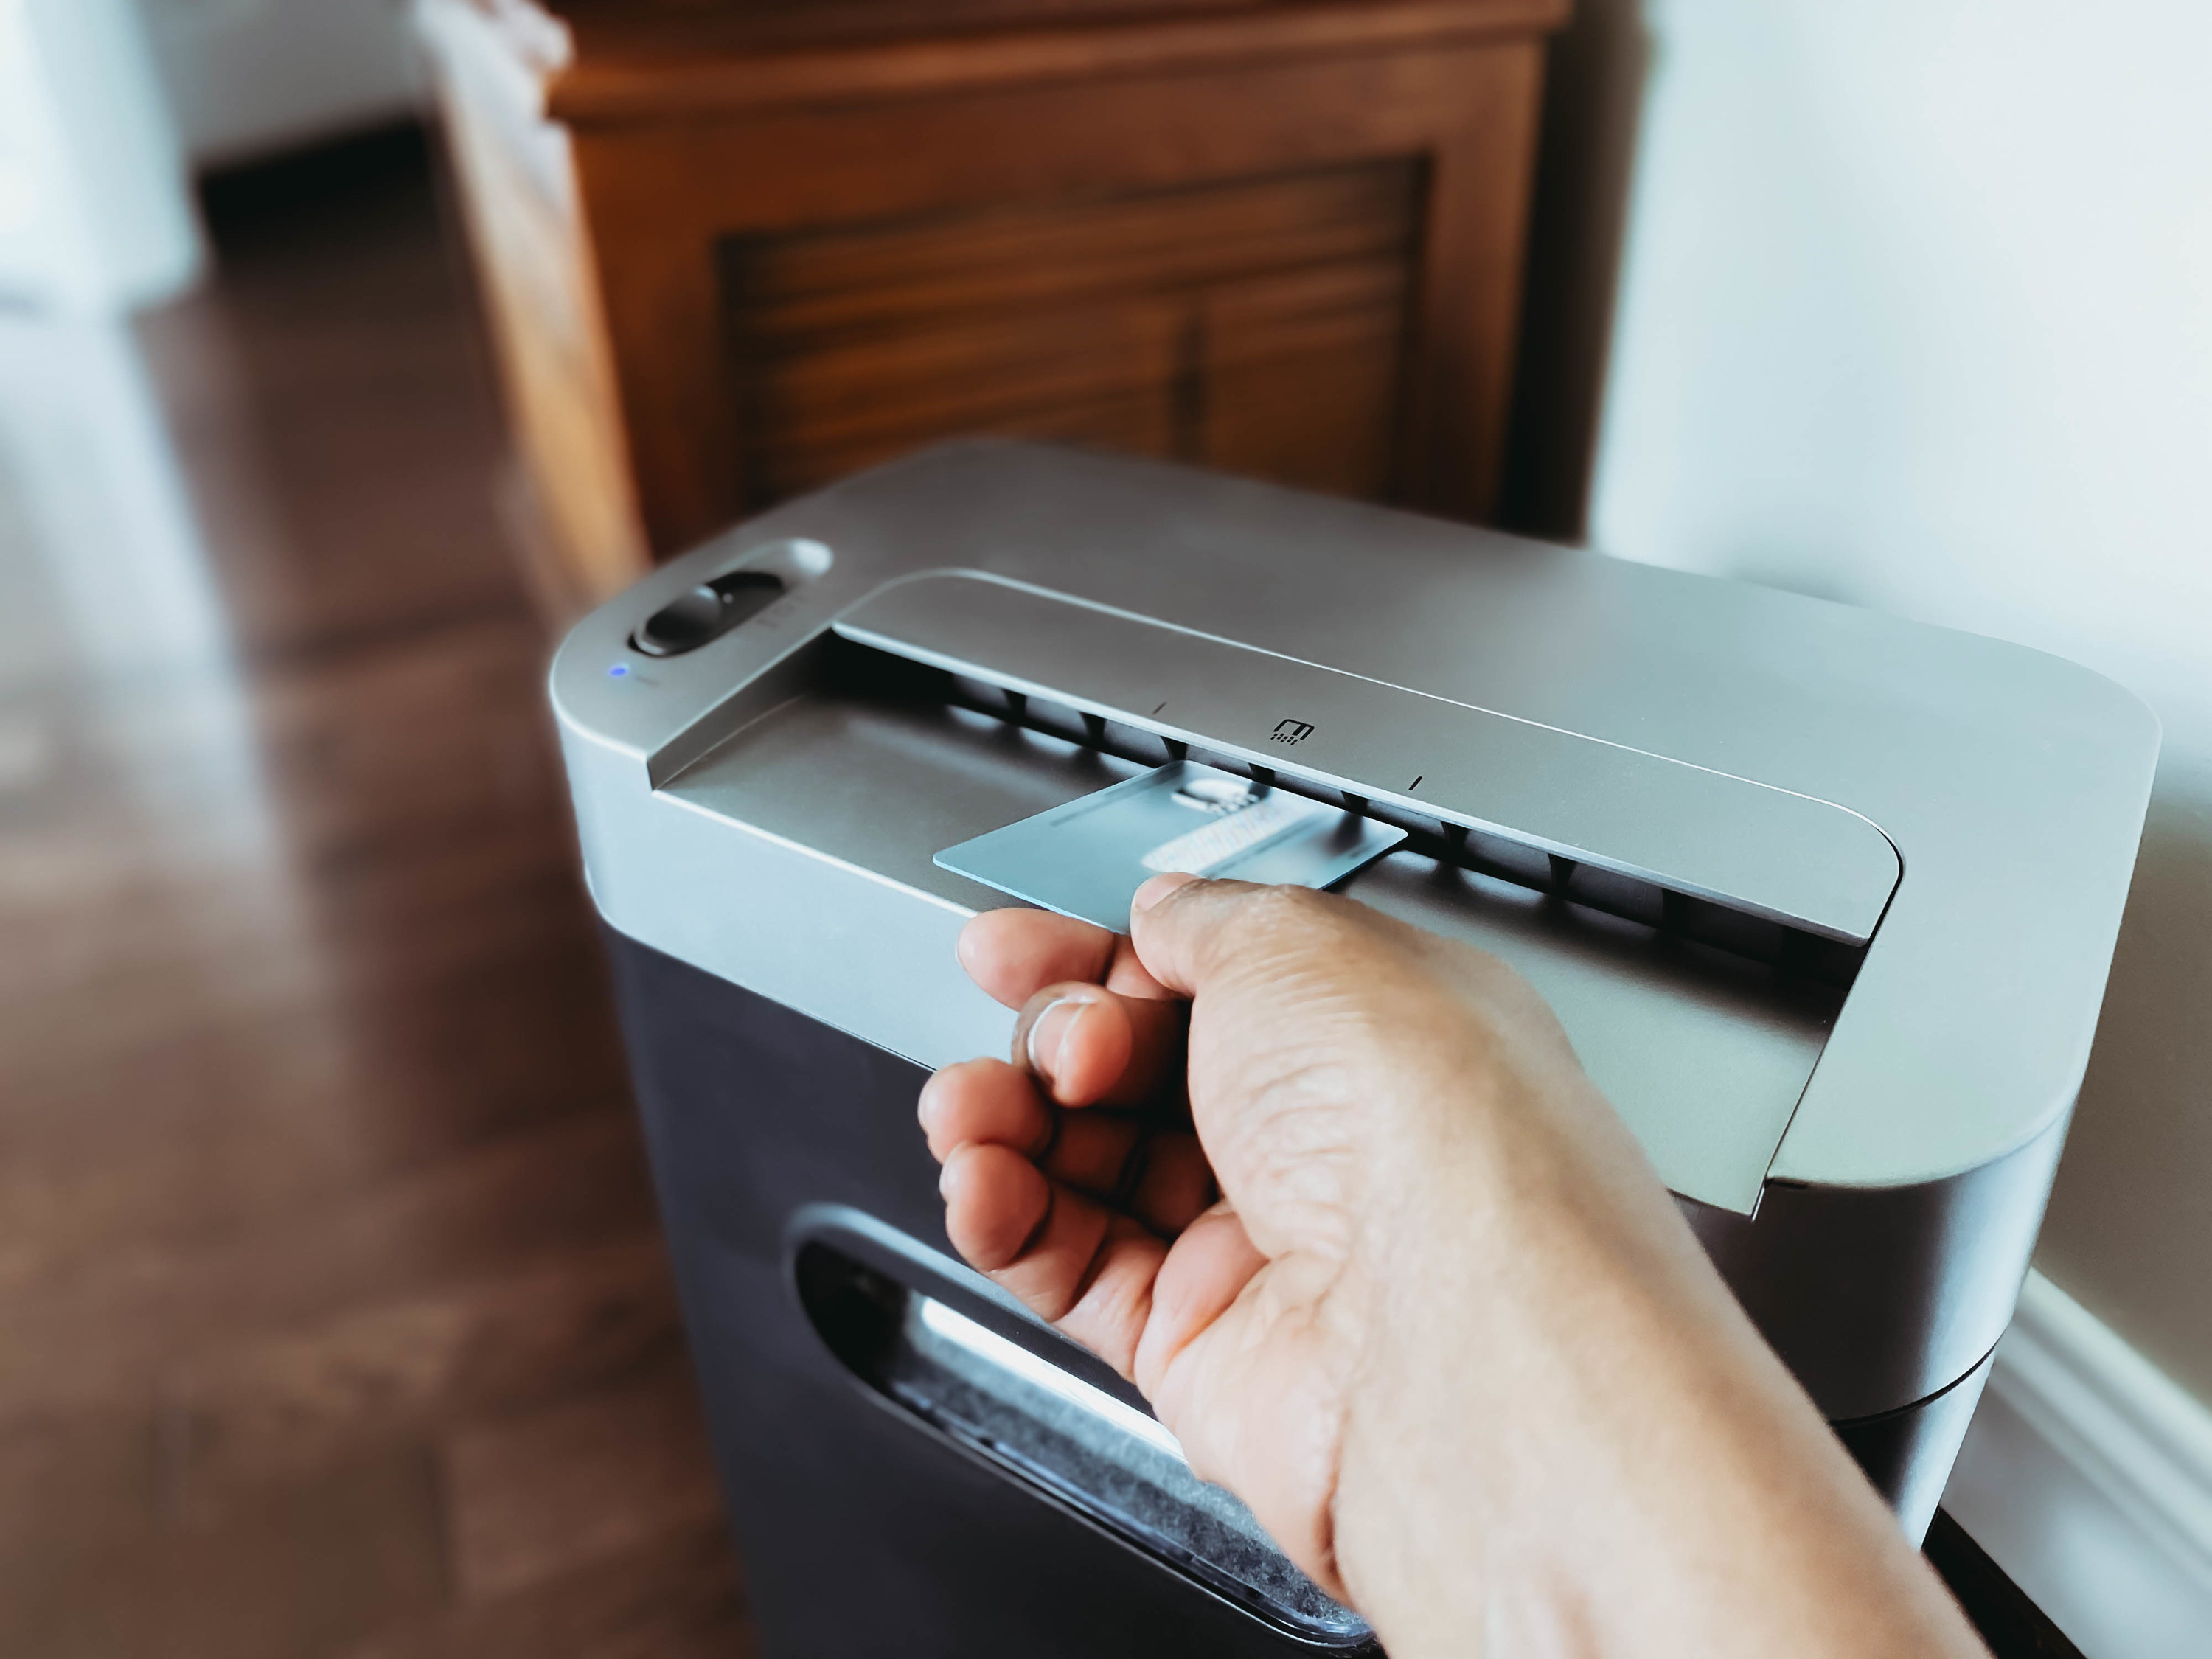 Close-up of hand putting a credit card into a paper shredder